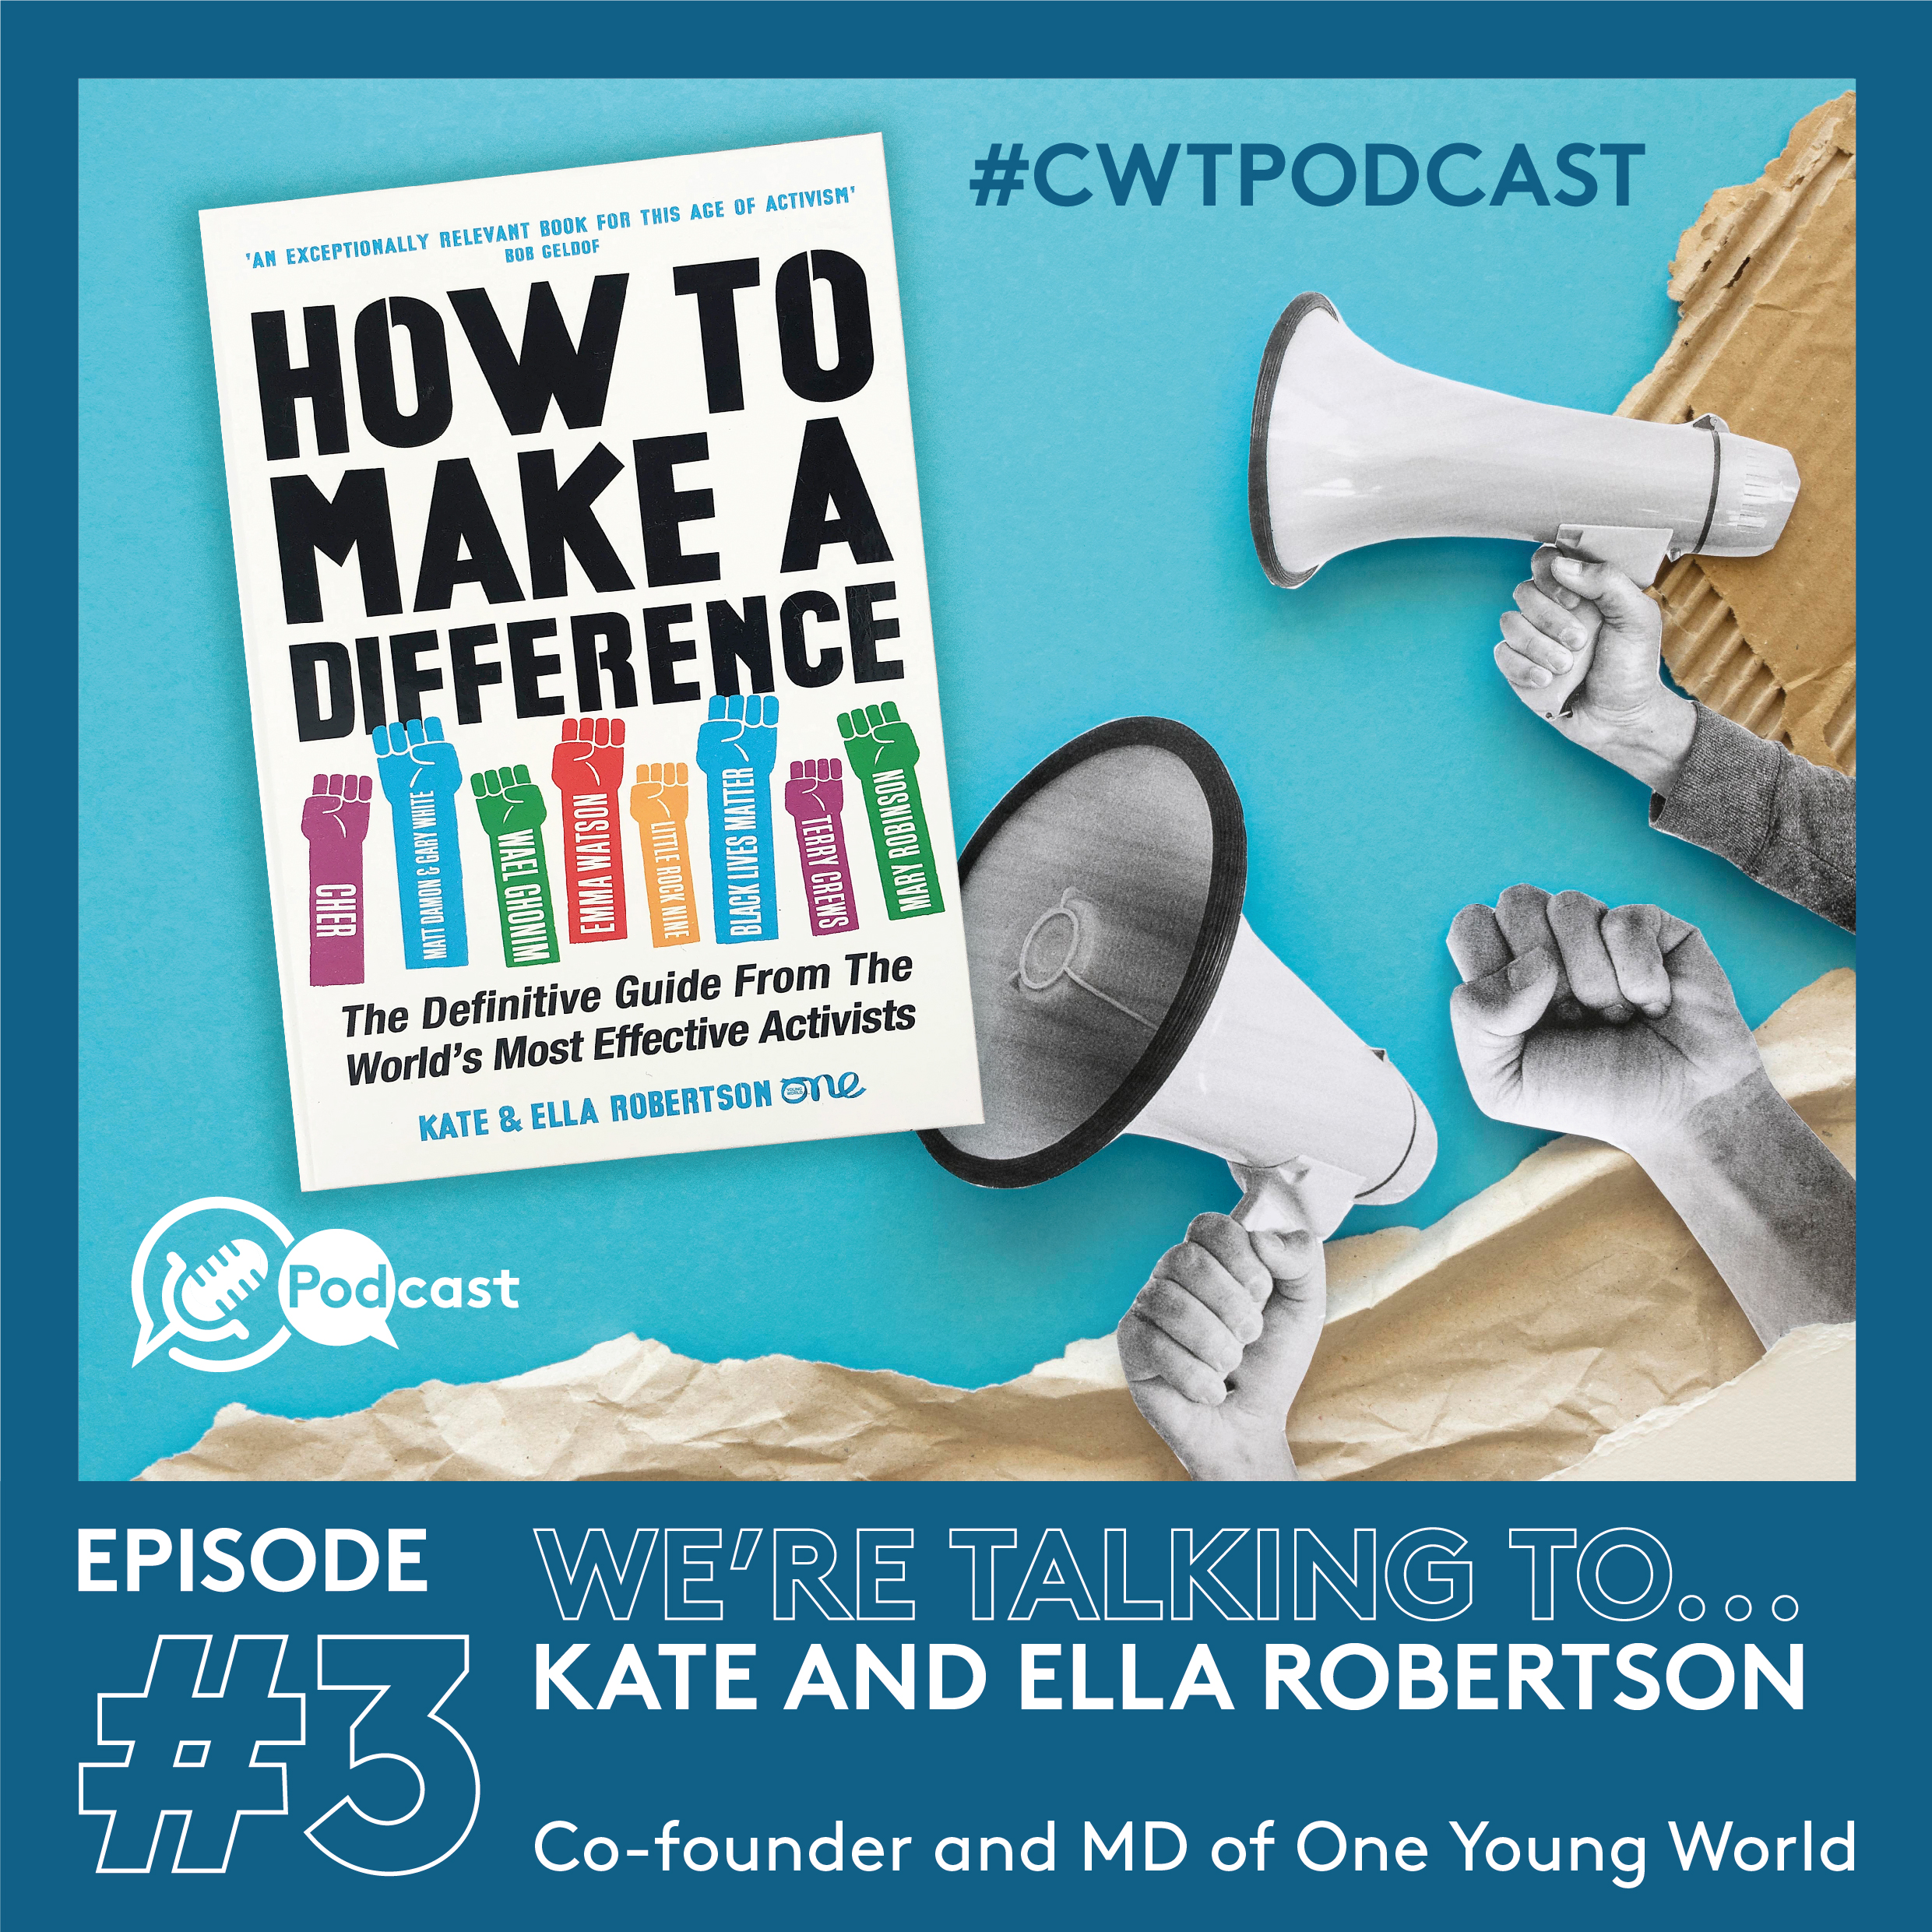 Image of Kate and Ella Robertsons book on the podcast episode artwork